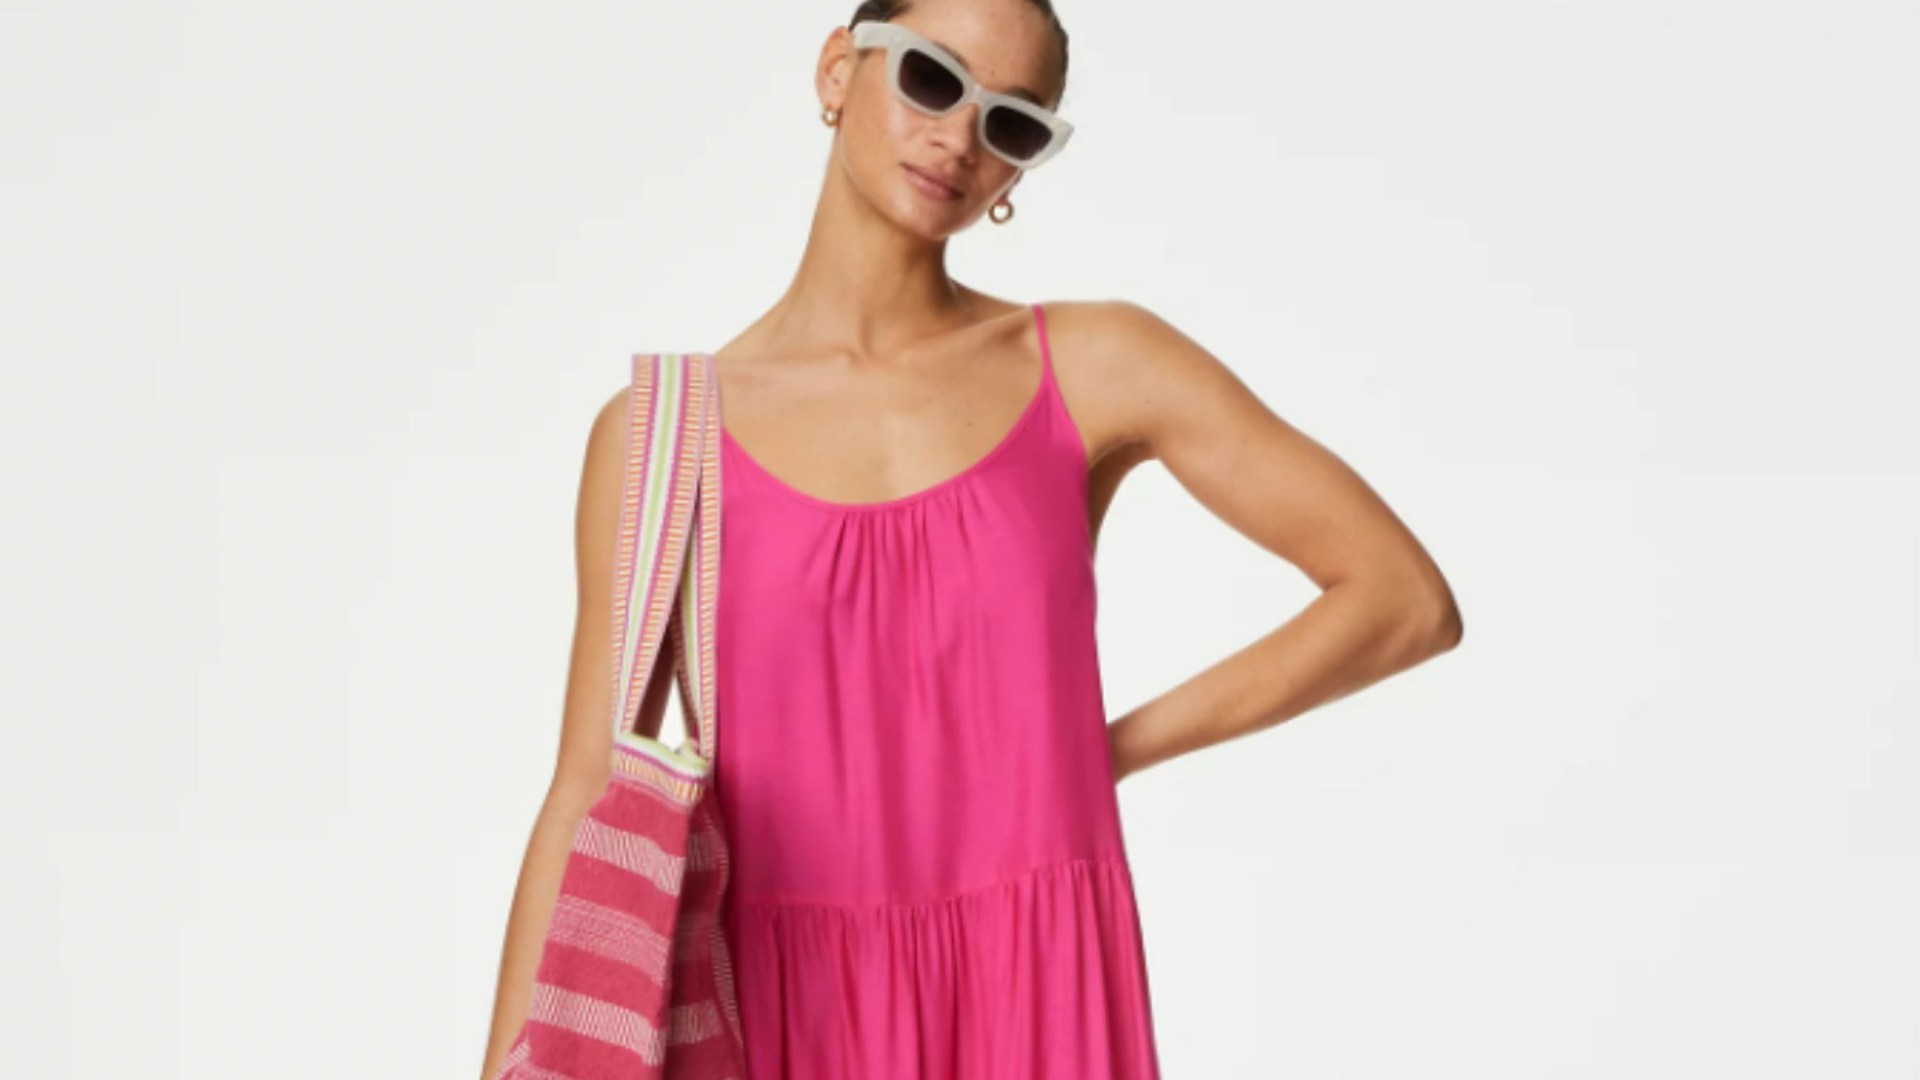 Fashion fans rave about new M&S beach dress that’s flying off the shelves – it’s perfect for holidays & is less than £20